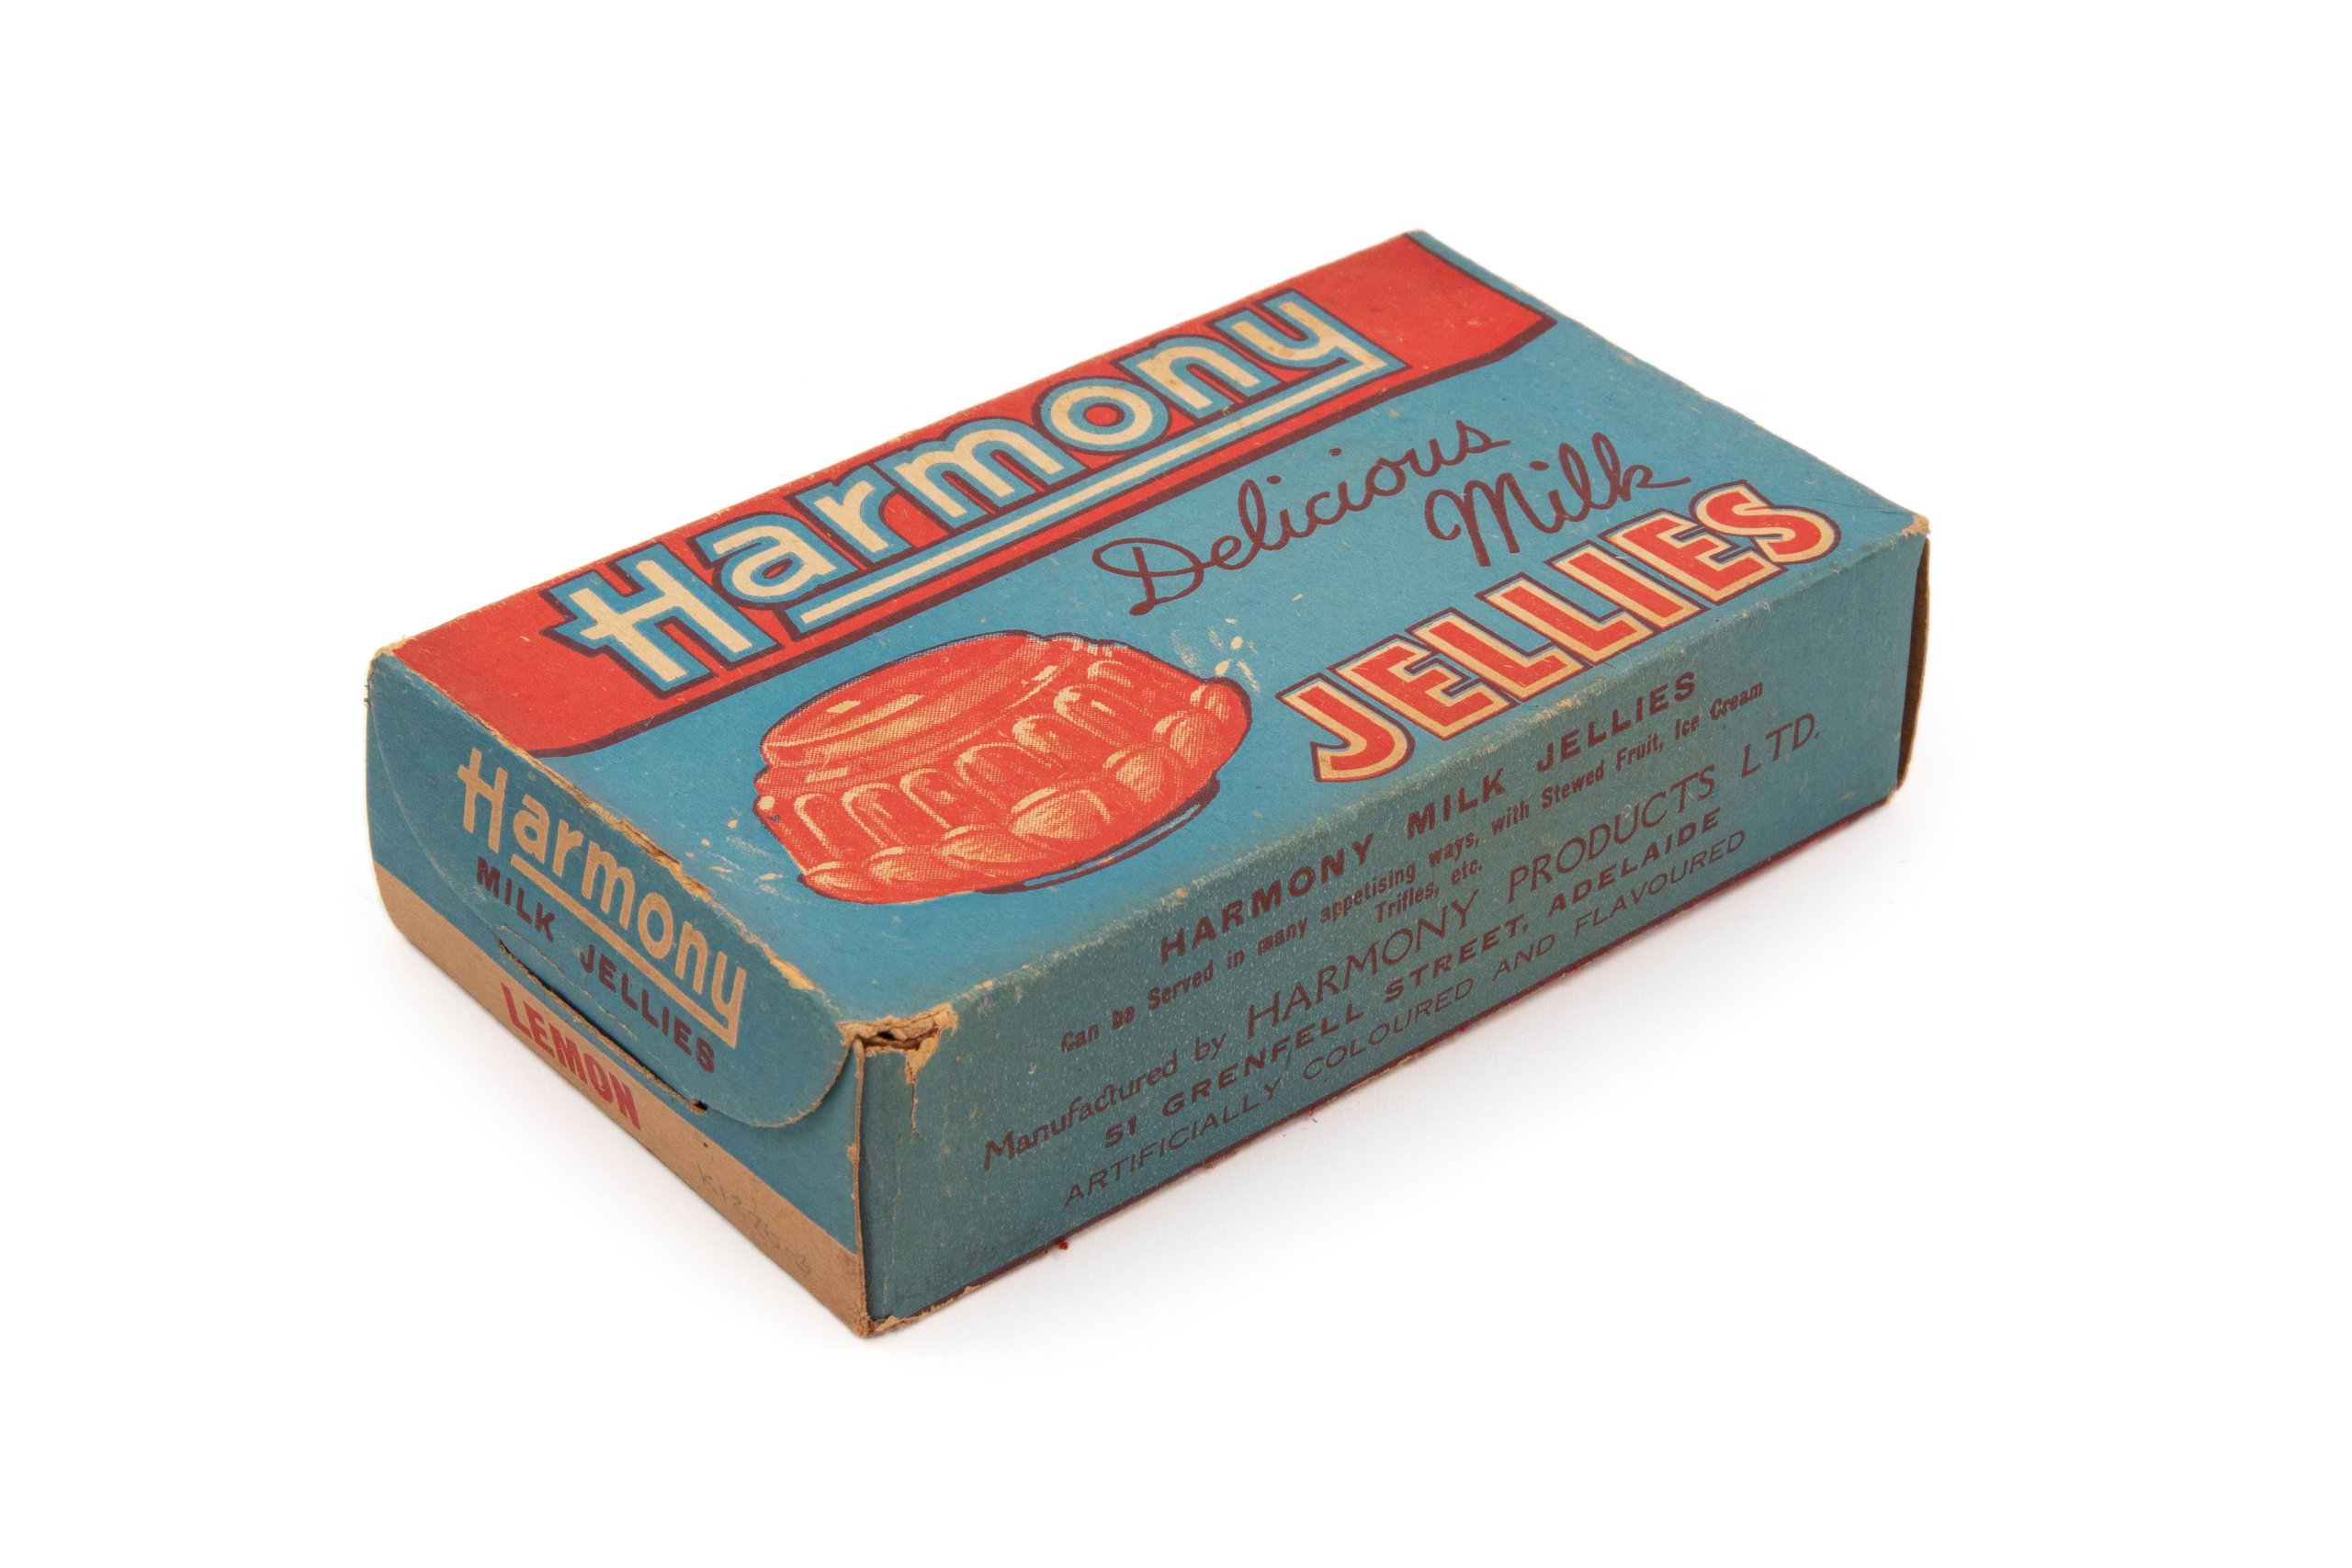 Package for 'Harmony Milk Jelly' pudding mix